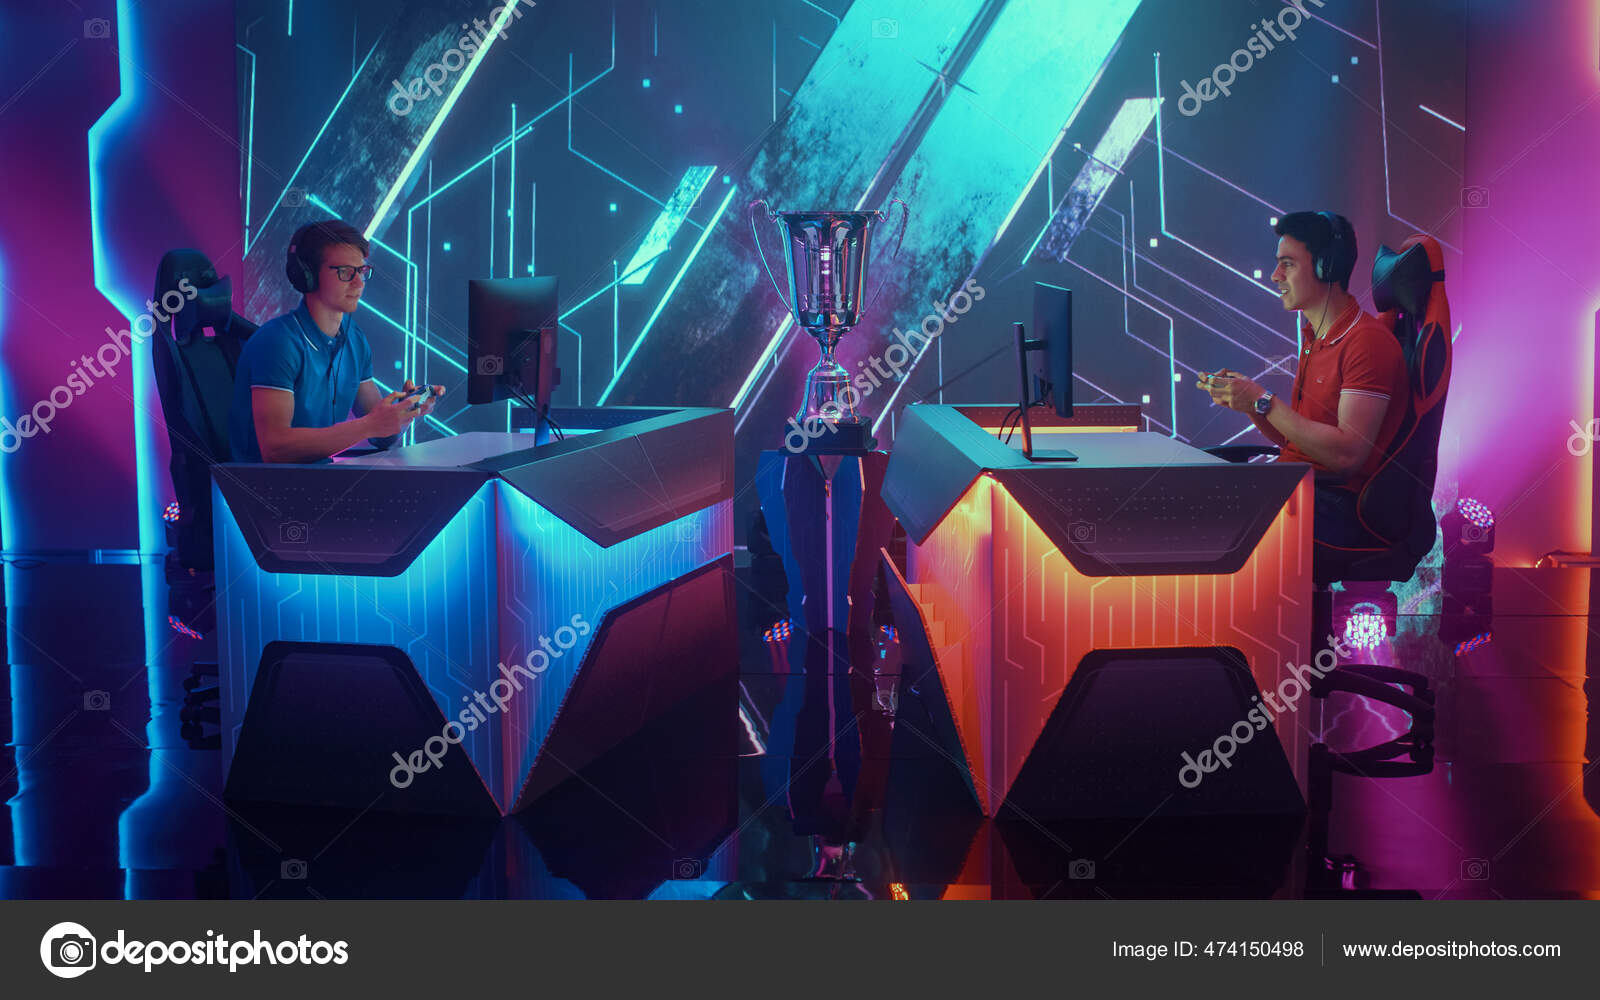 Two Professional Esport Gamers Using Controllers Playing Console Video Games on a Championship Event with Big TV Screens and Stylish Neon Arena